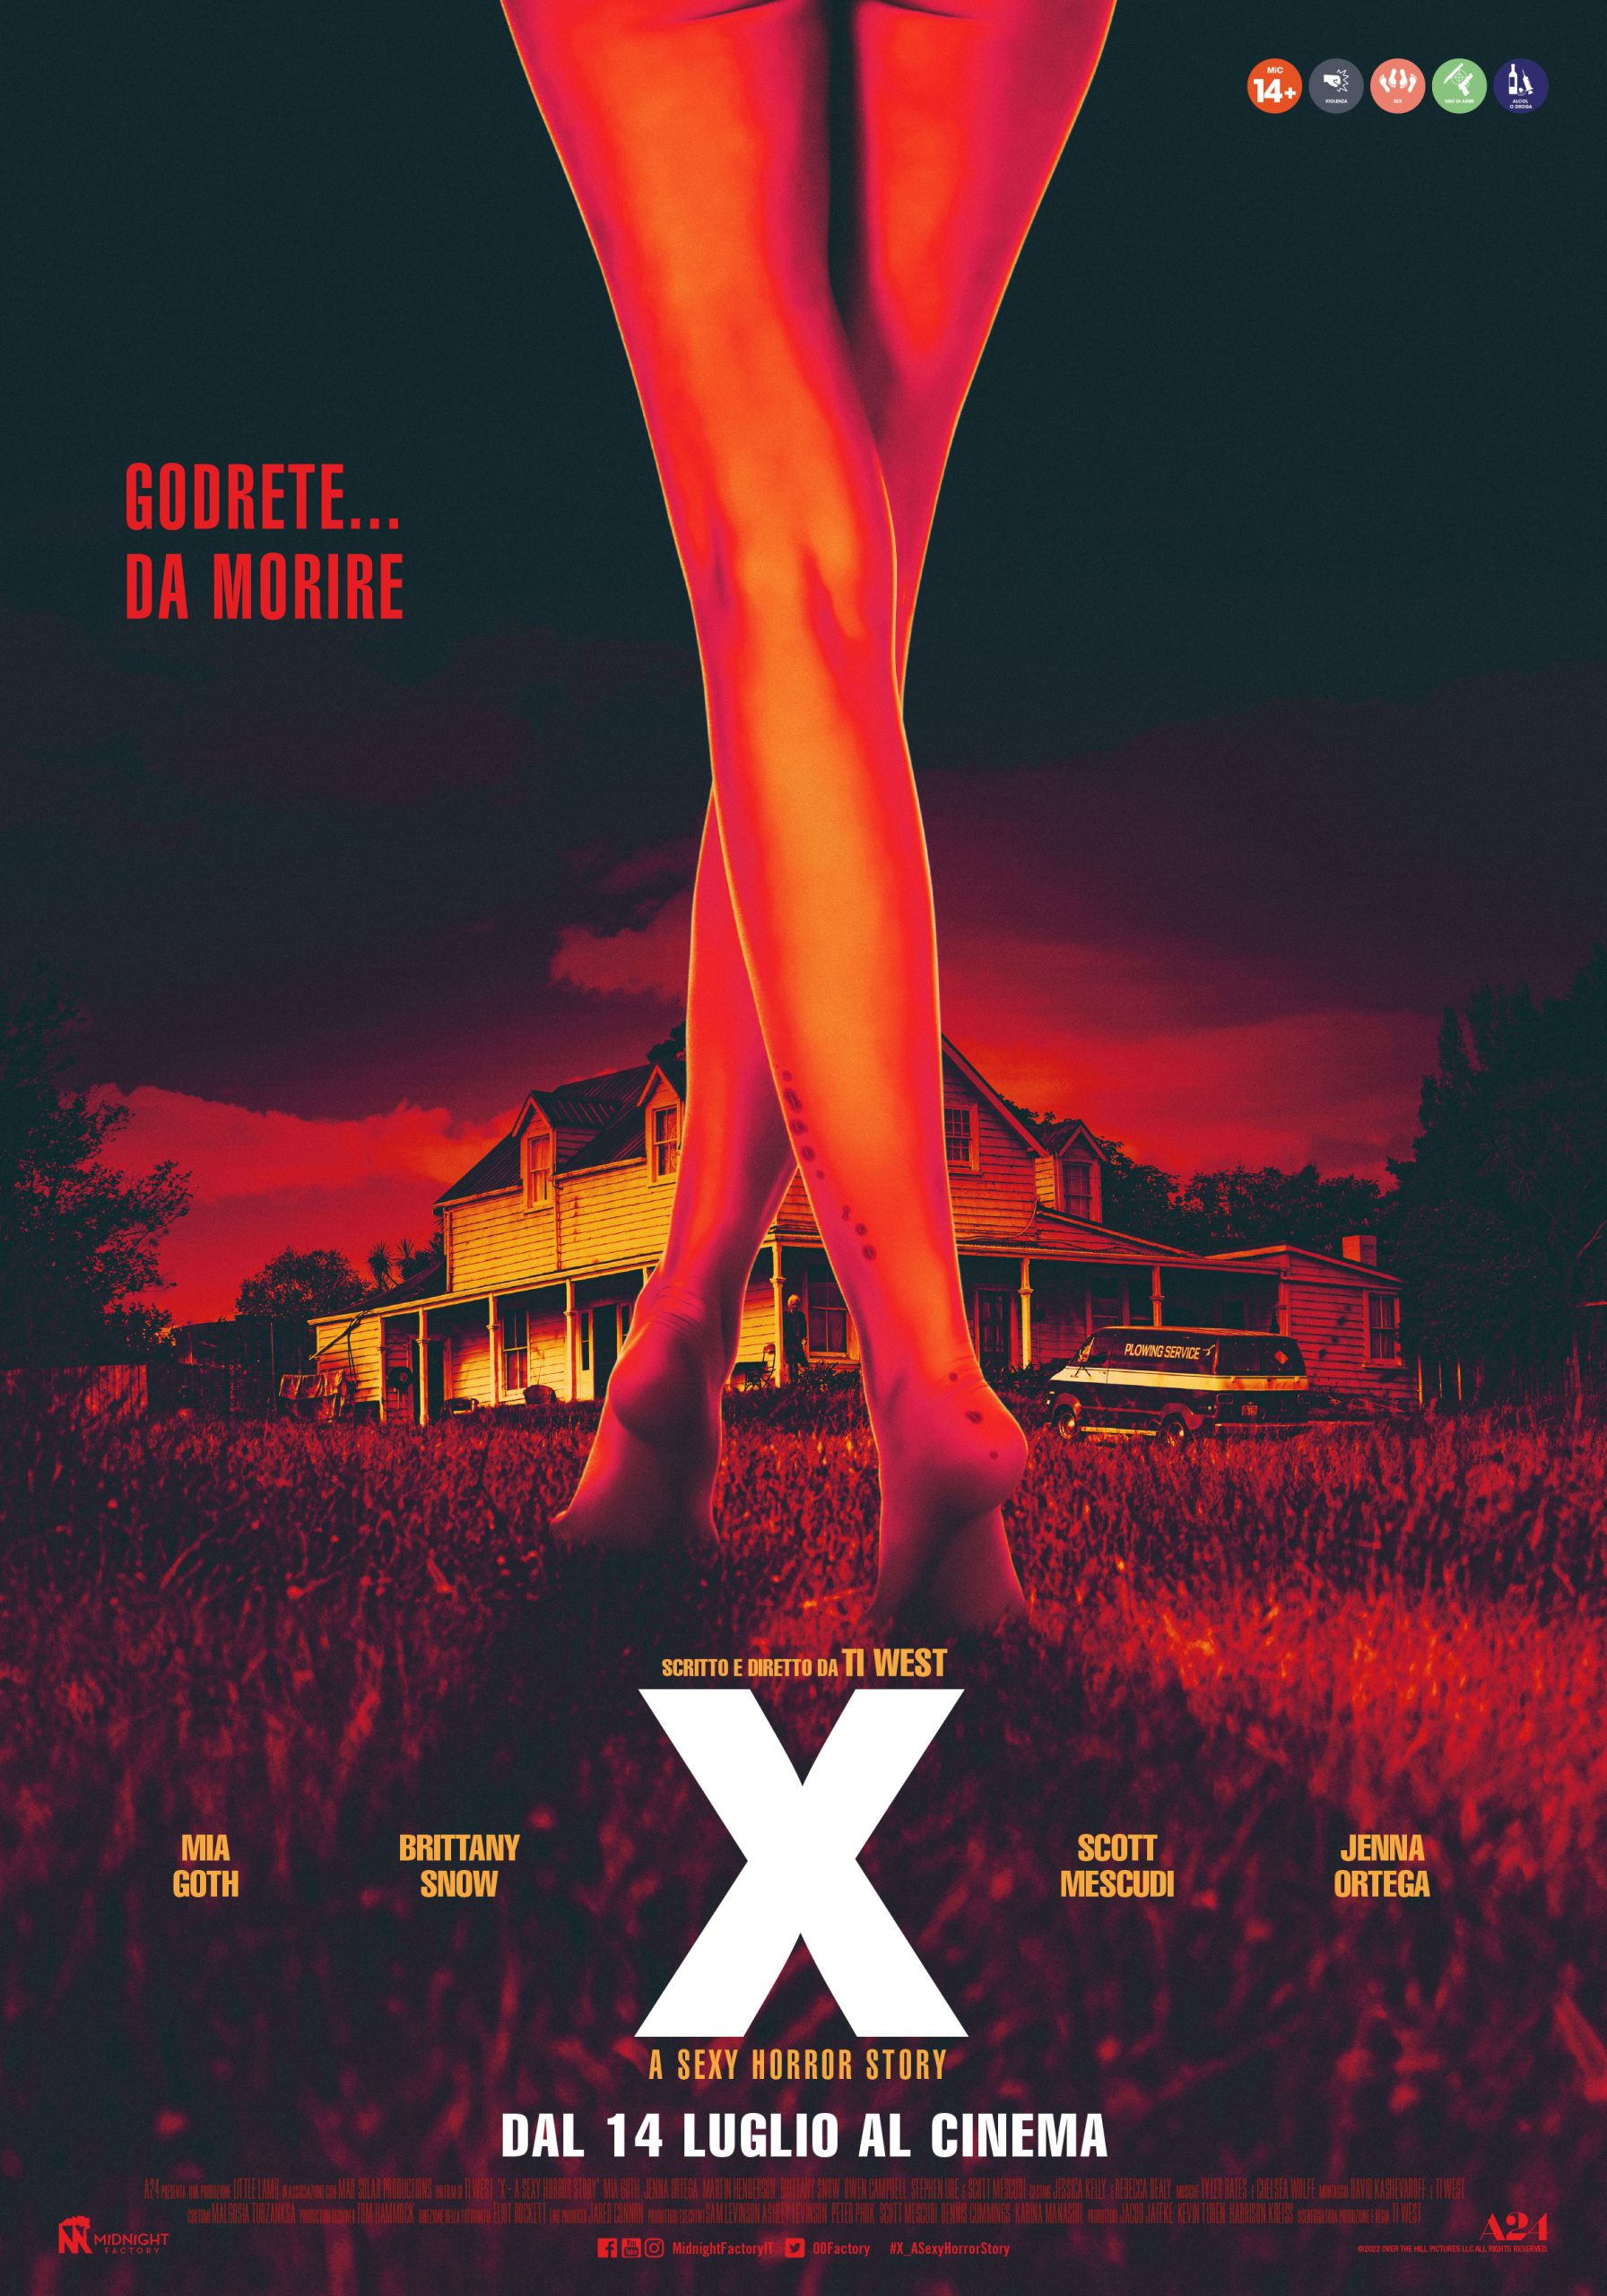 [RECENSIONE] X – A Sexy Horror Story (Ti West)